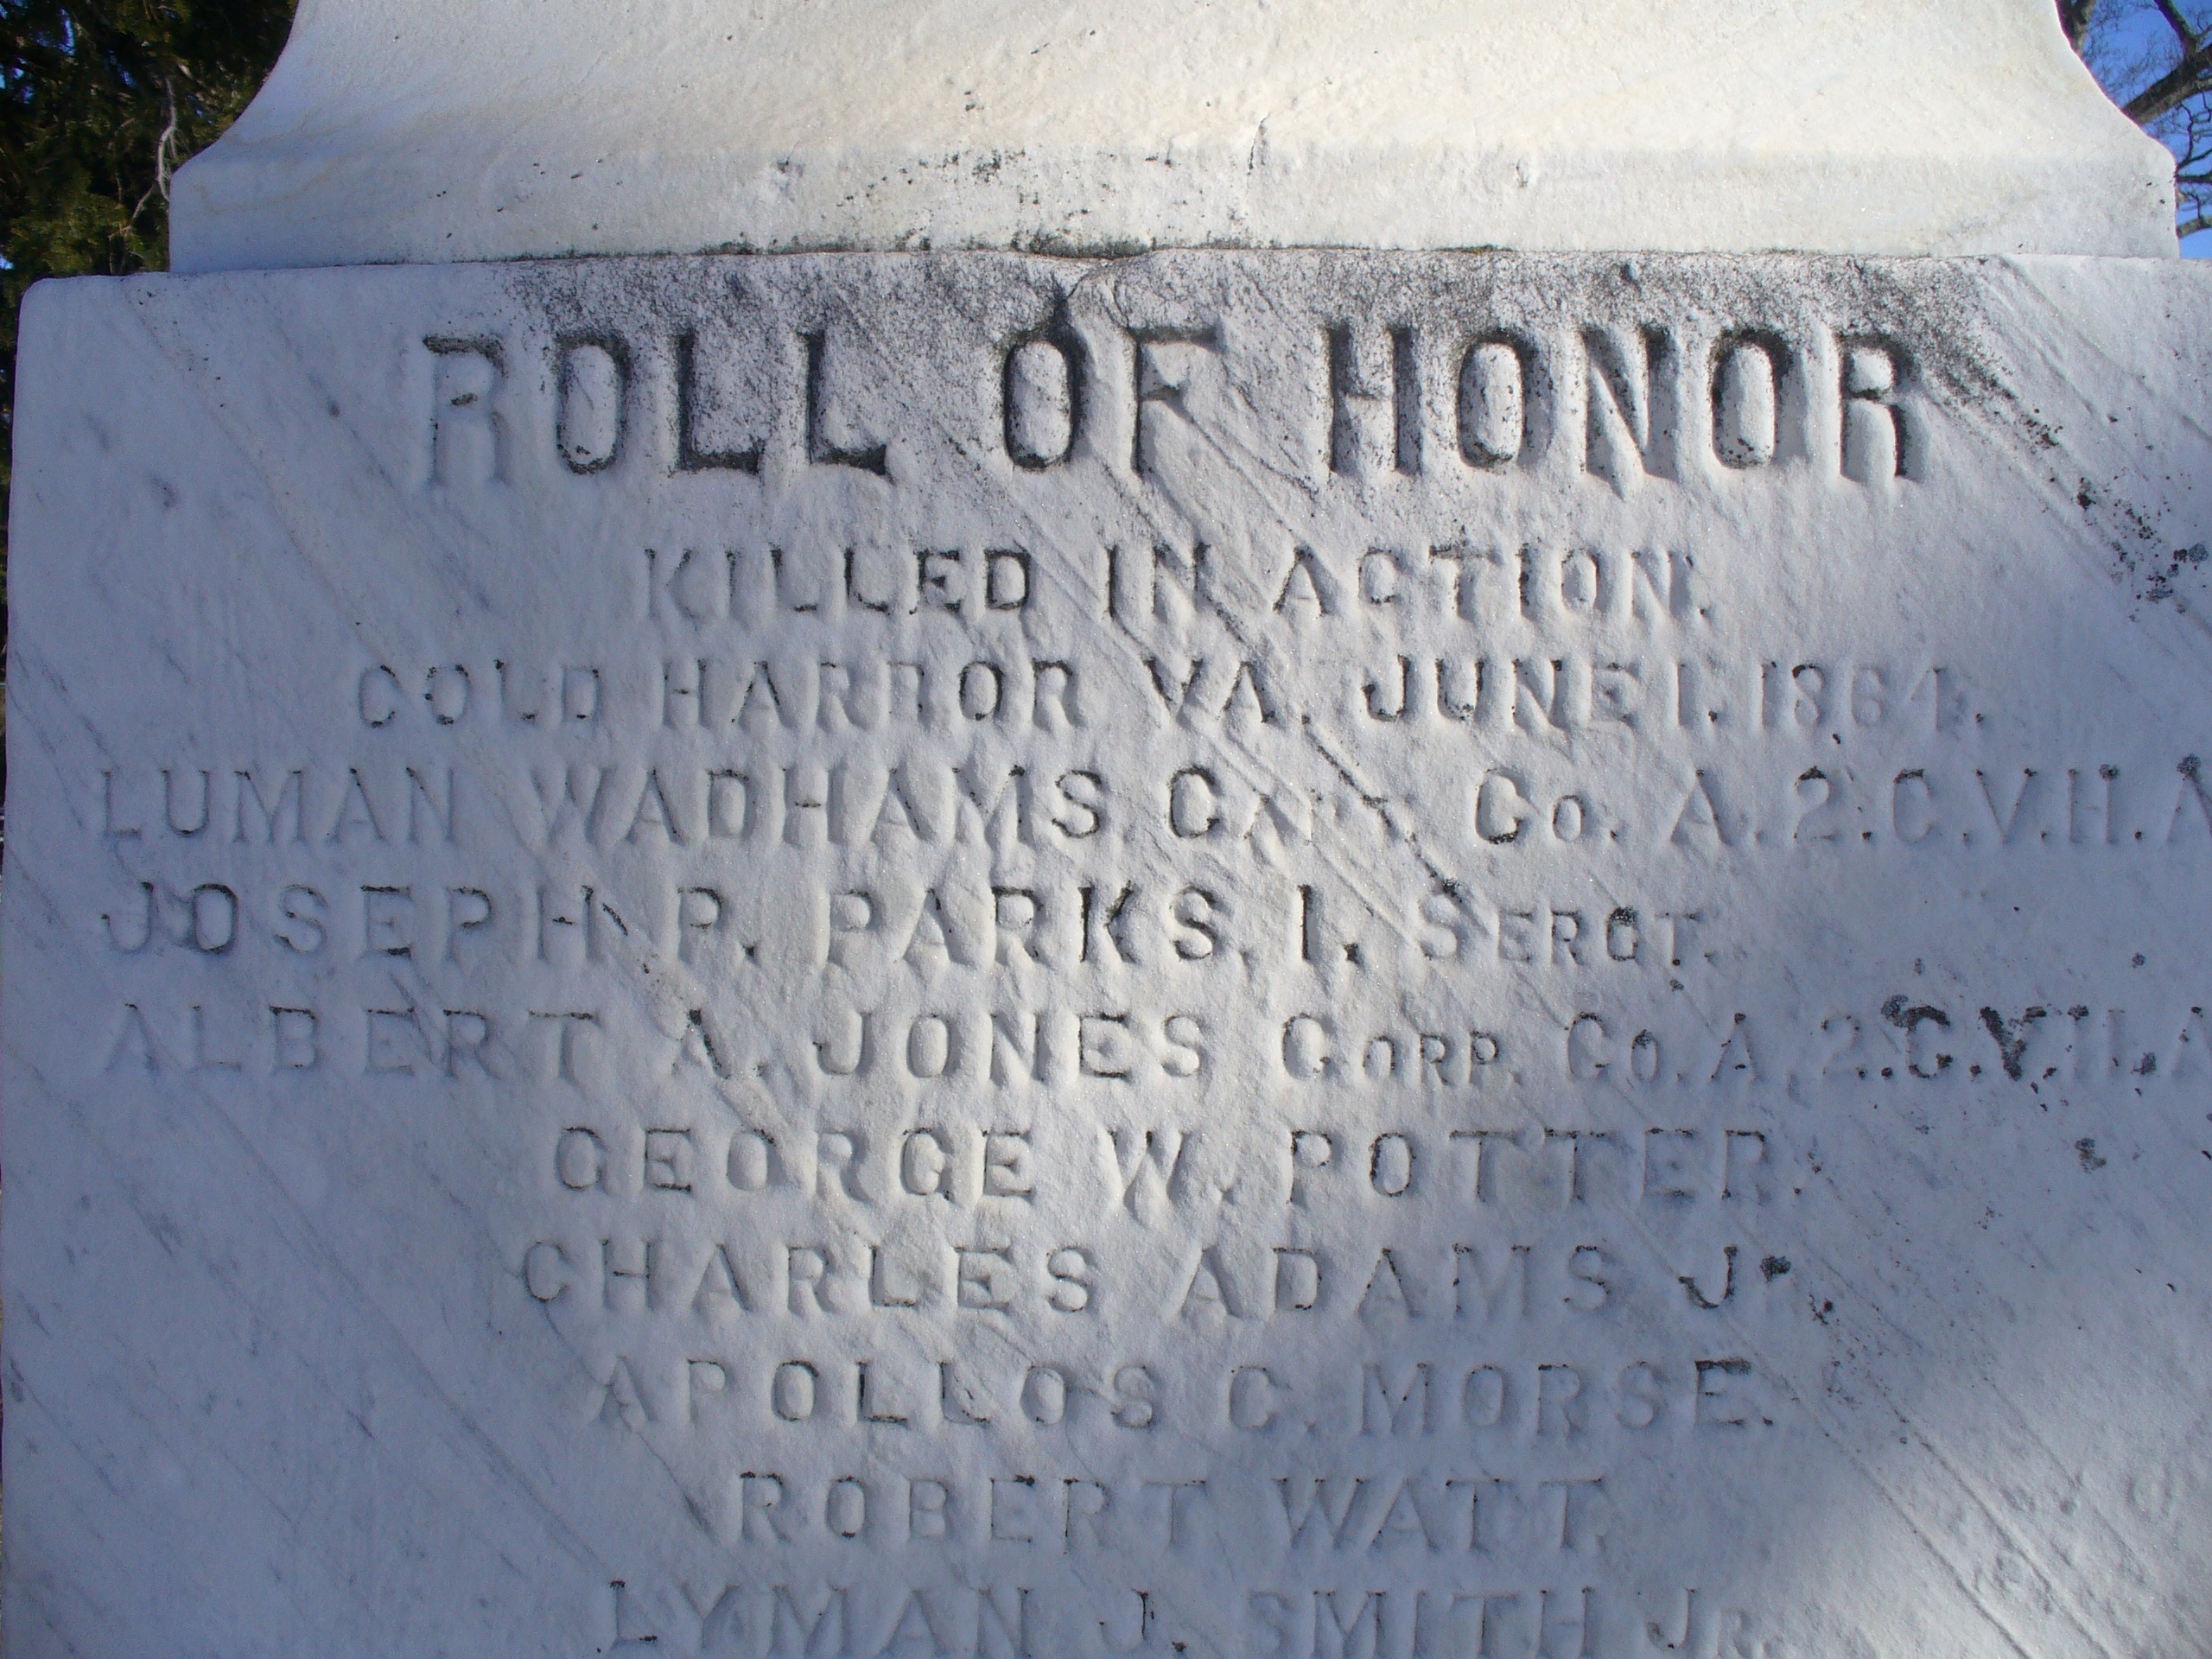 white stone monument inscribed with the words “Roll of Honor” and the names of soldiers killed in action at Cold Harbor